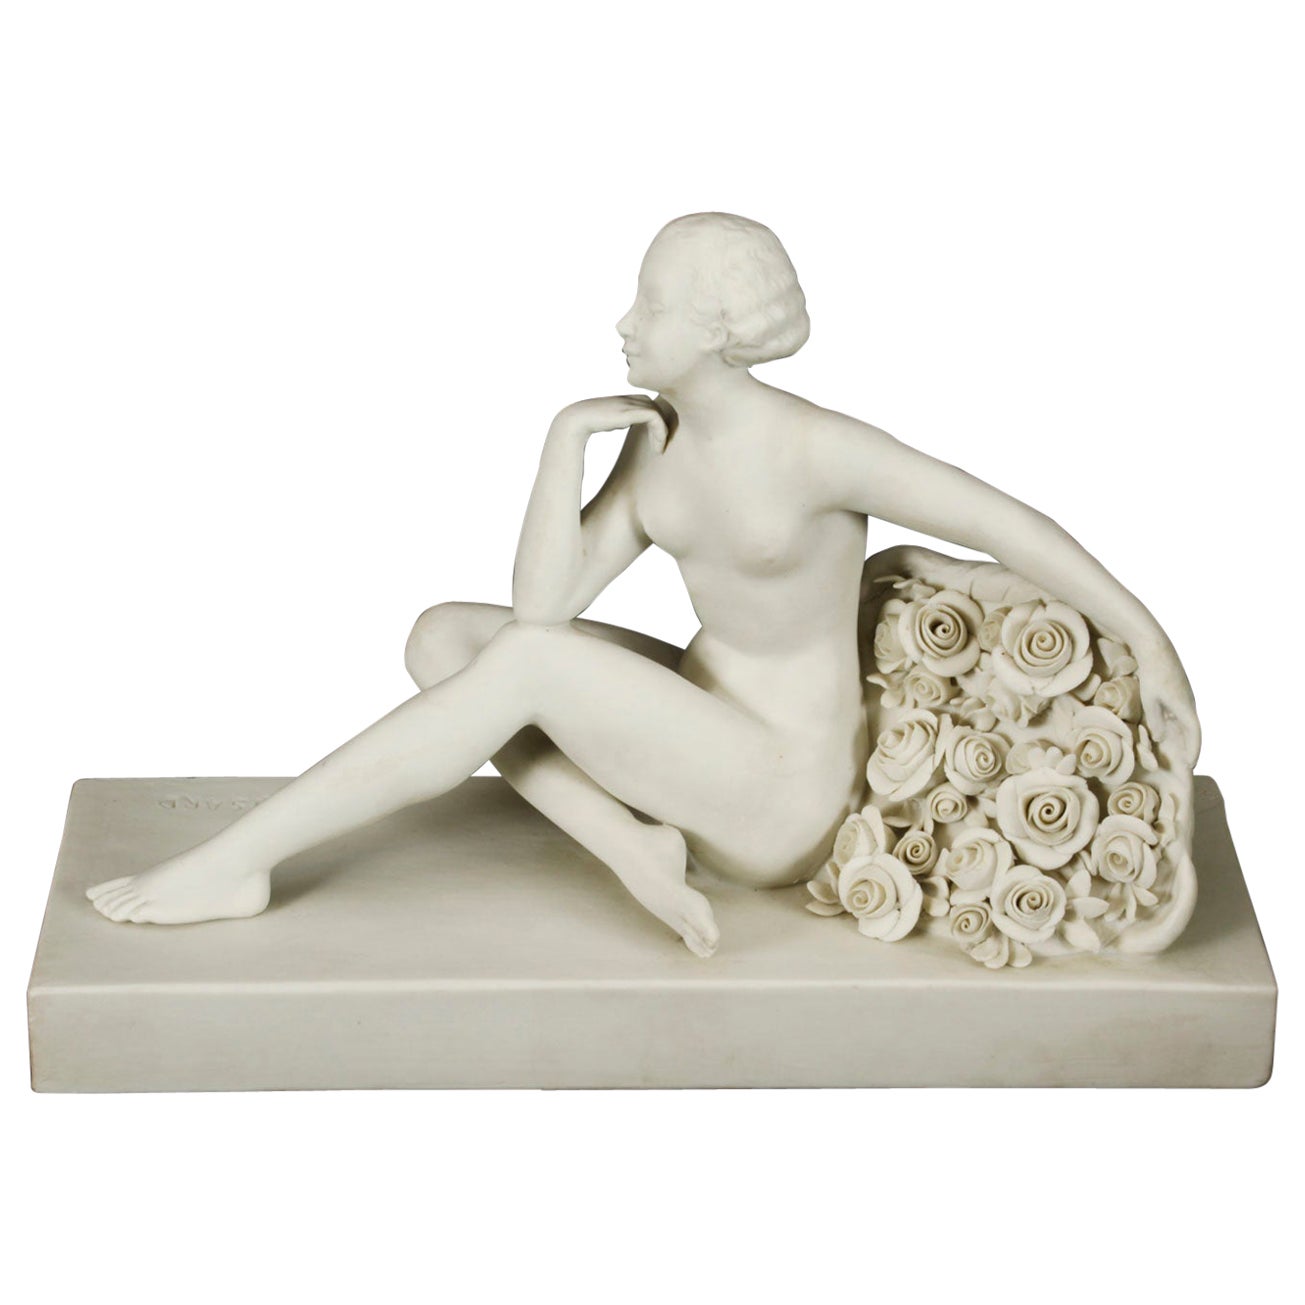 Antique Art Deco Bisque Porcelain Sculpture "Seated Nude With Flowers" 20th C For Sale